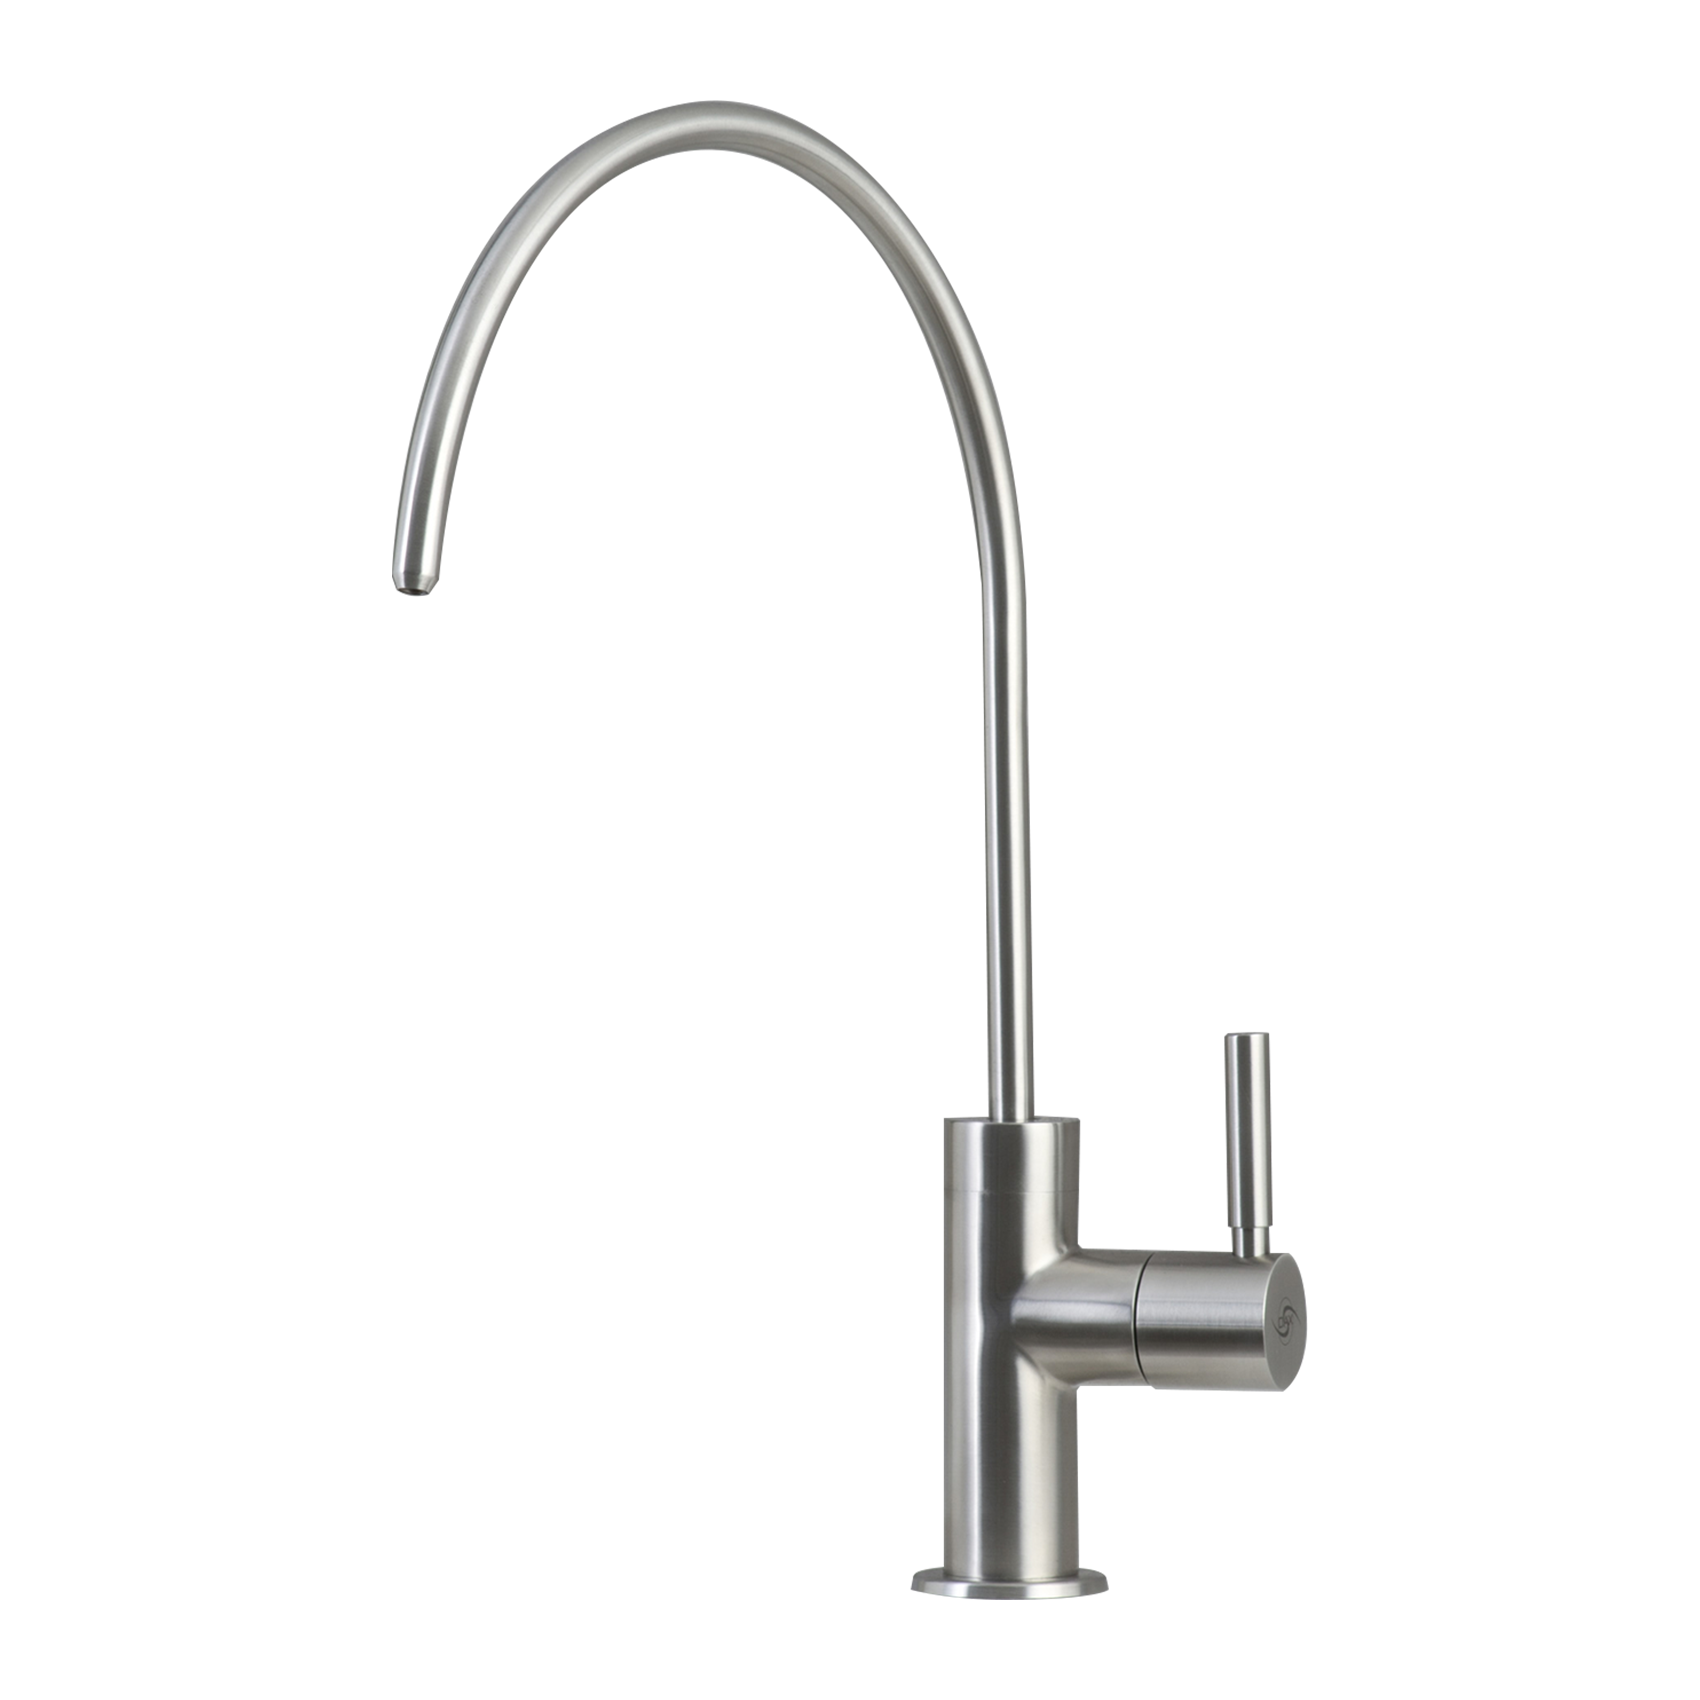 DAX Drinking Water Faucet, Stainless Steel Body, Brushed Finish, Size 8-1/2 x 12-1/4 Inches (DAX-PJ-01)